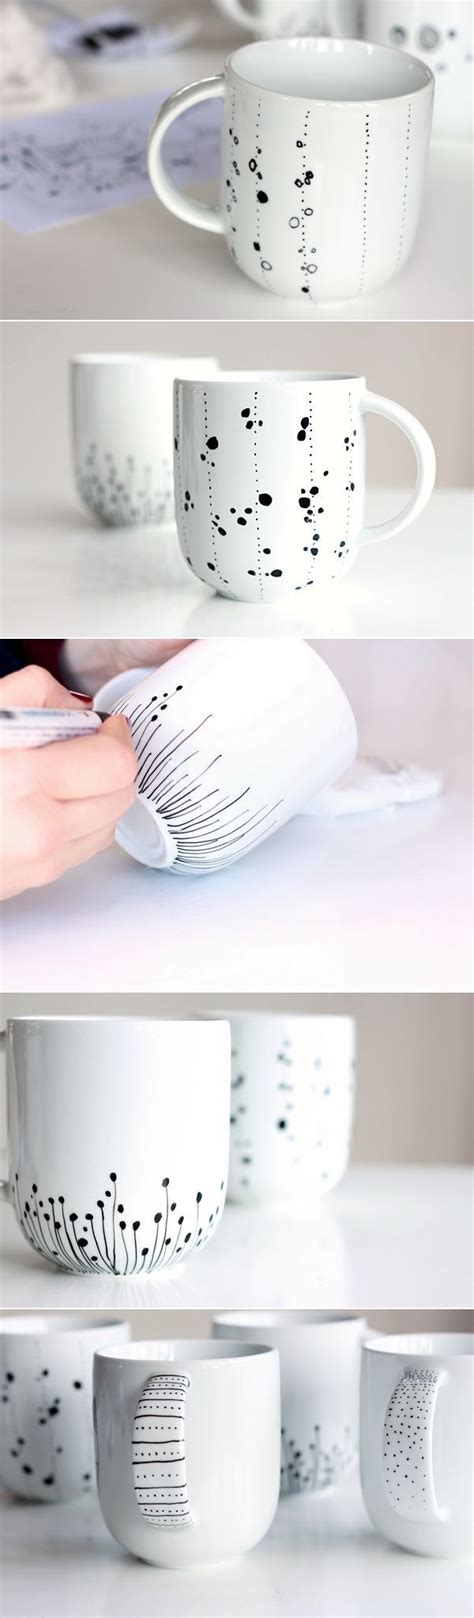 How To Decorate A Coffee Mug Using A Porcelain Marker Marker Crafts